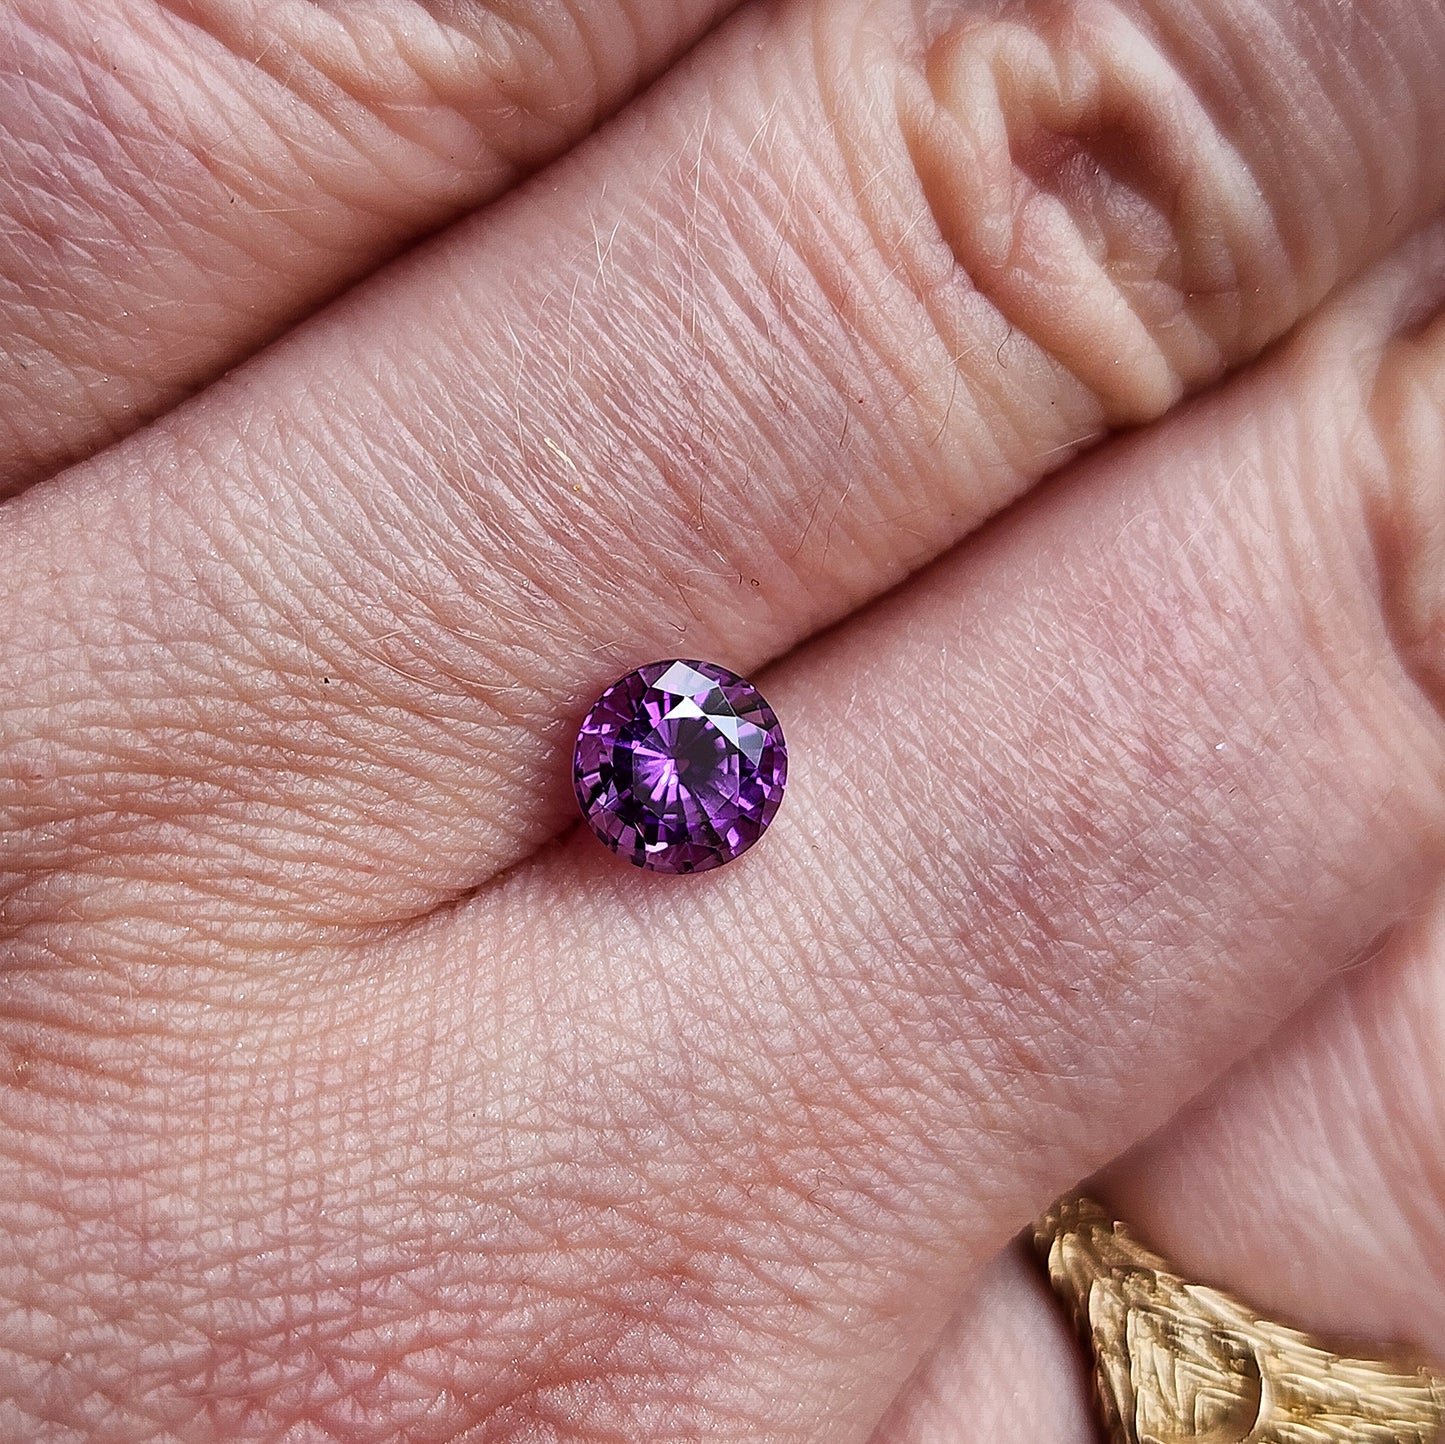 Round Cut Chatham Purple Sapphire- For Build Your Own Pieces